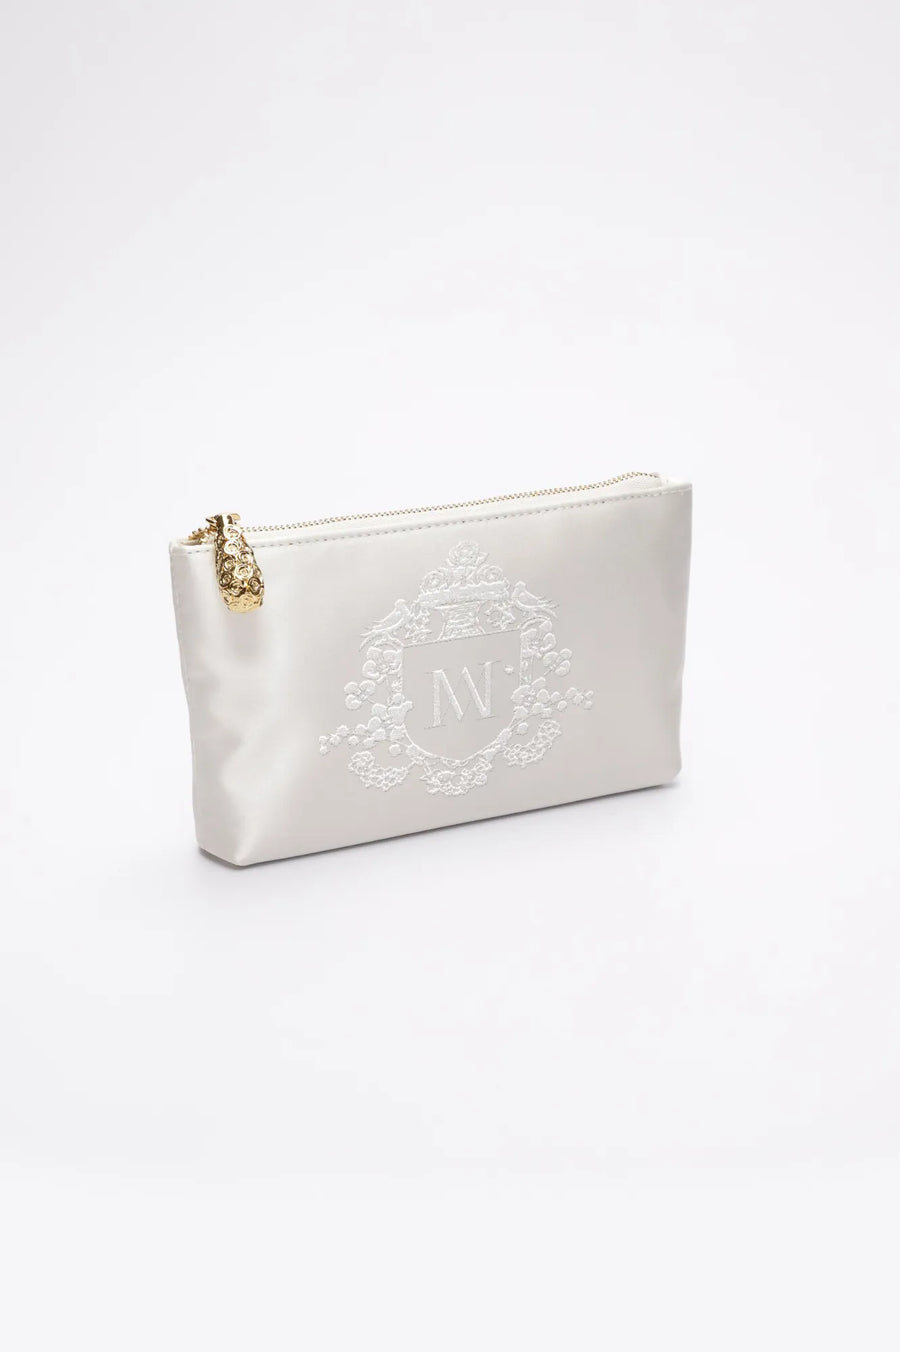 Side view of ivory satin zipper pouch with bridal crest monogram embroidery.